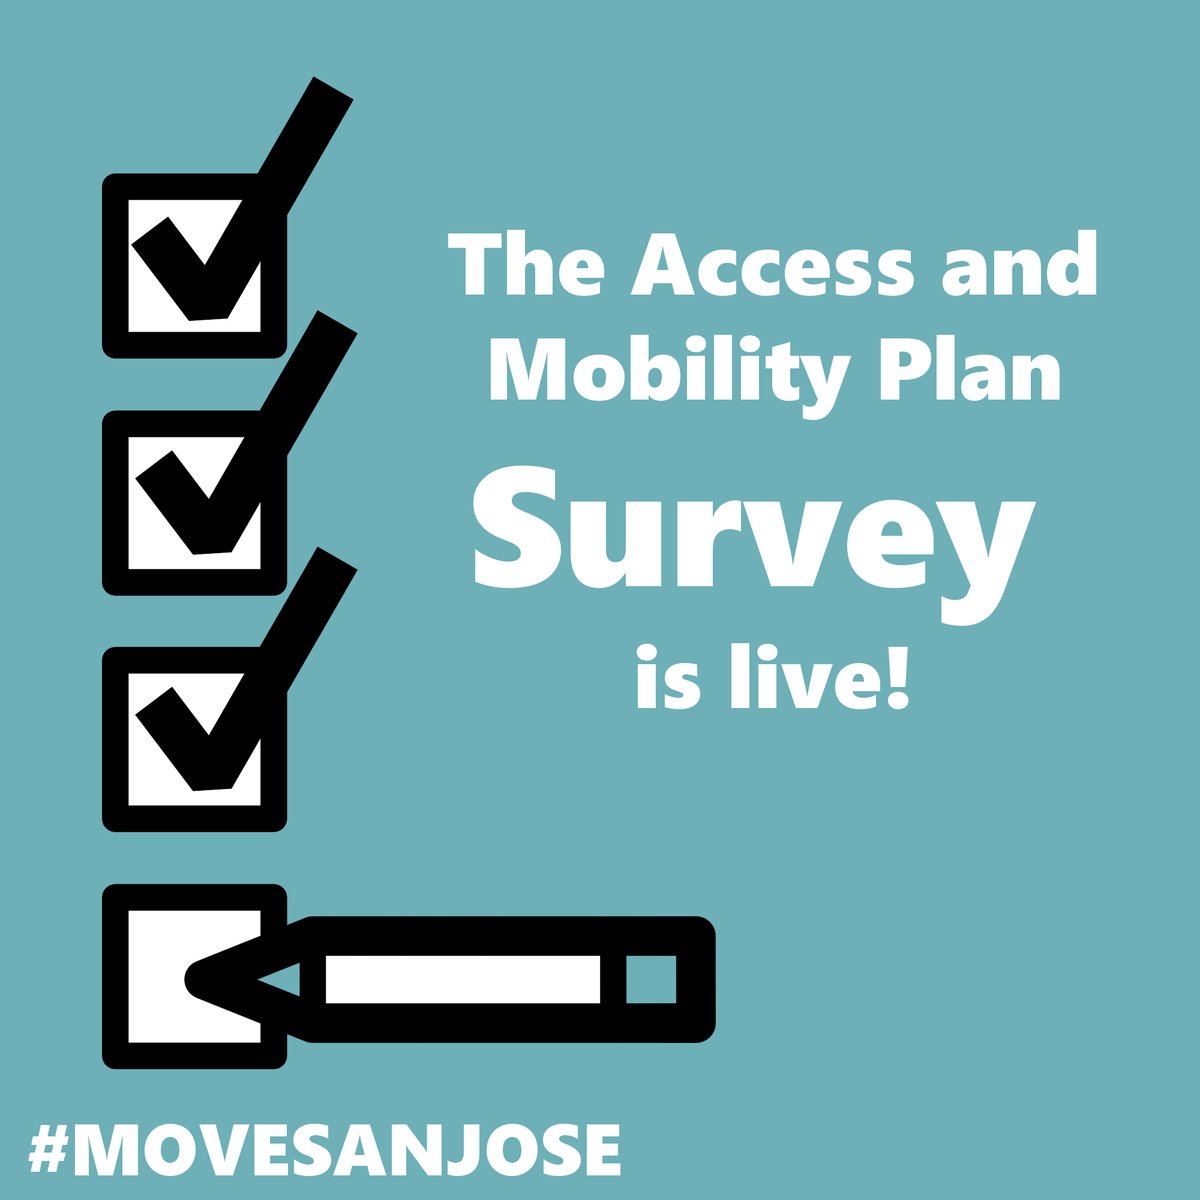 The Access and Mobility Plan Survey is live! By sharing this link with your community, you can help even more! The more responses we get, the better we can meet the transportation needs of everyone in #SanJose! movesanjose.org/access-mobilit… #MoveSanJose #SanJoseCA #SiliconValley